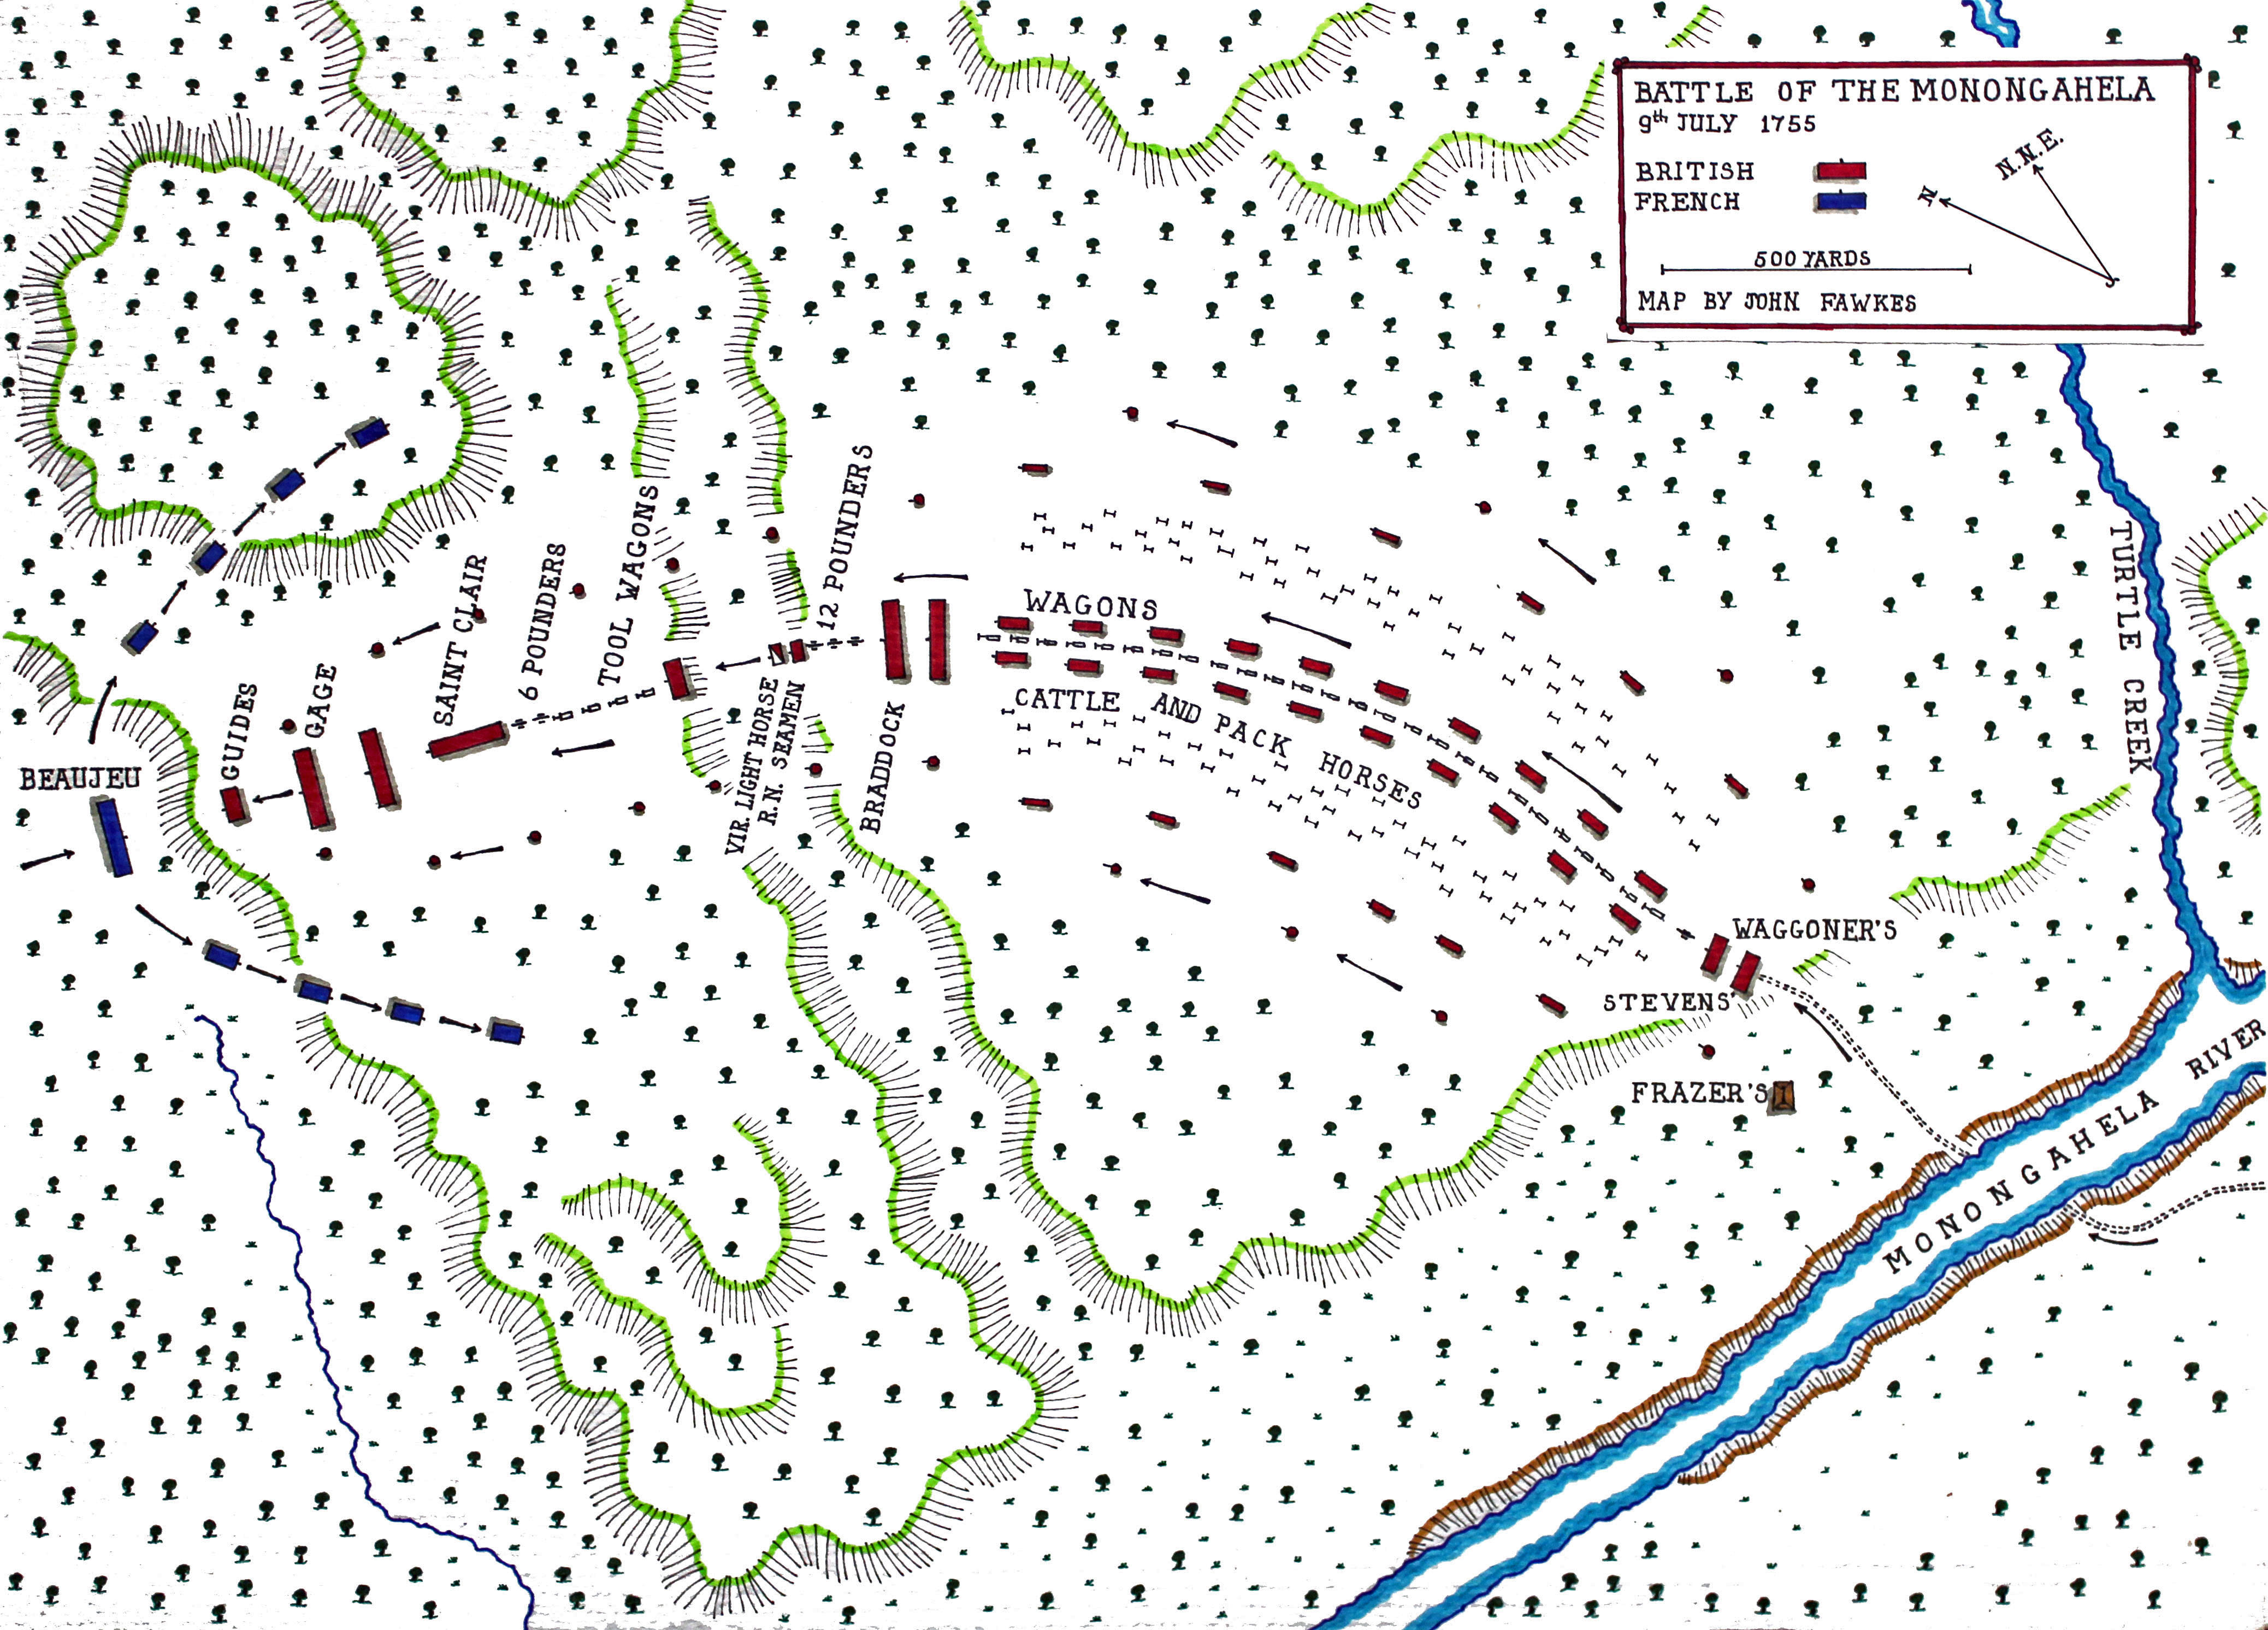 Map of General Braddock's defeat at the Battle of the Monongahela on 9th July 1755: by John Fawkes